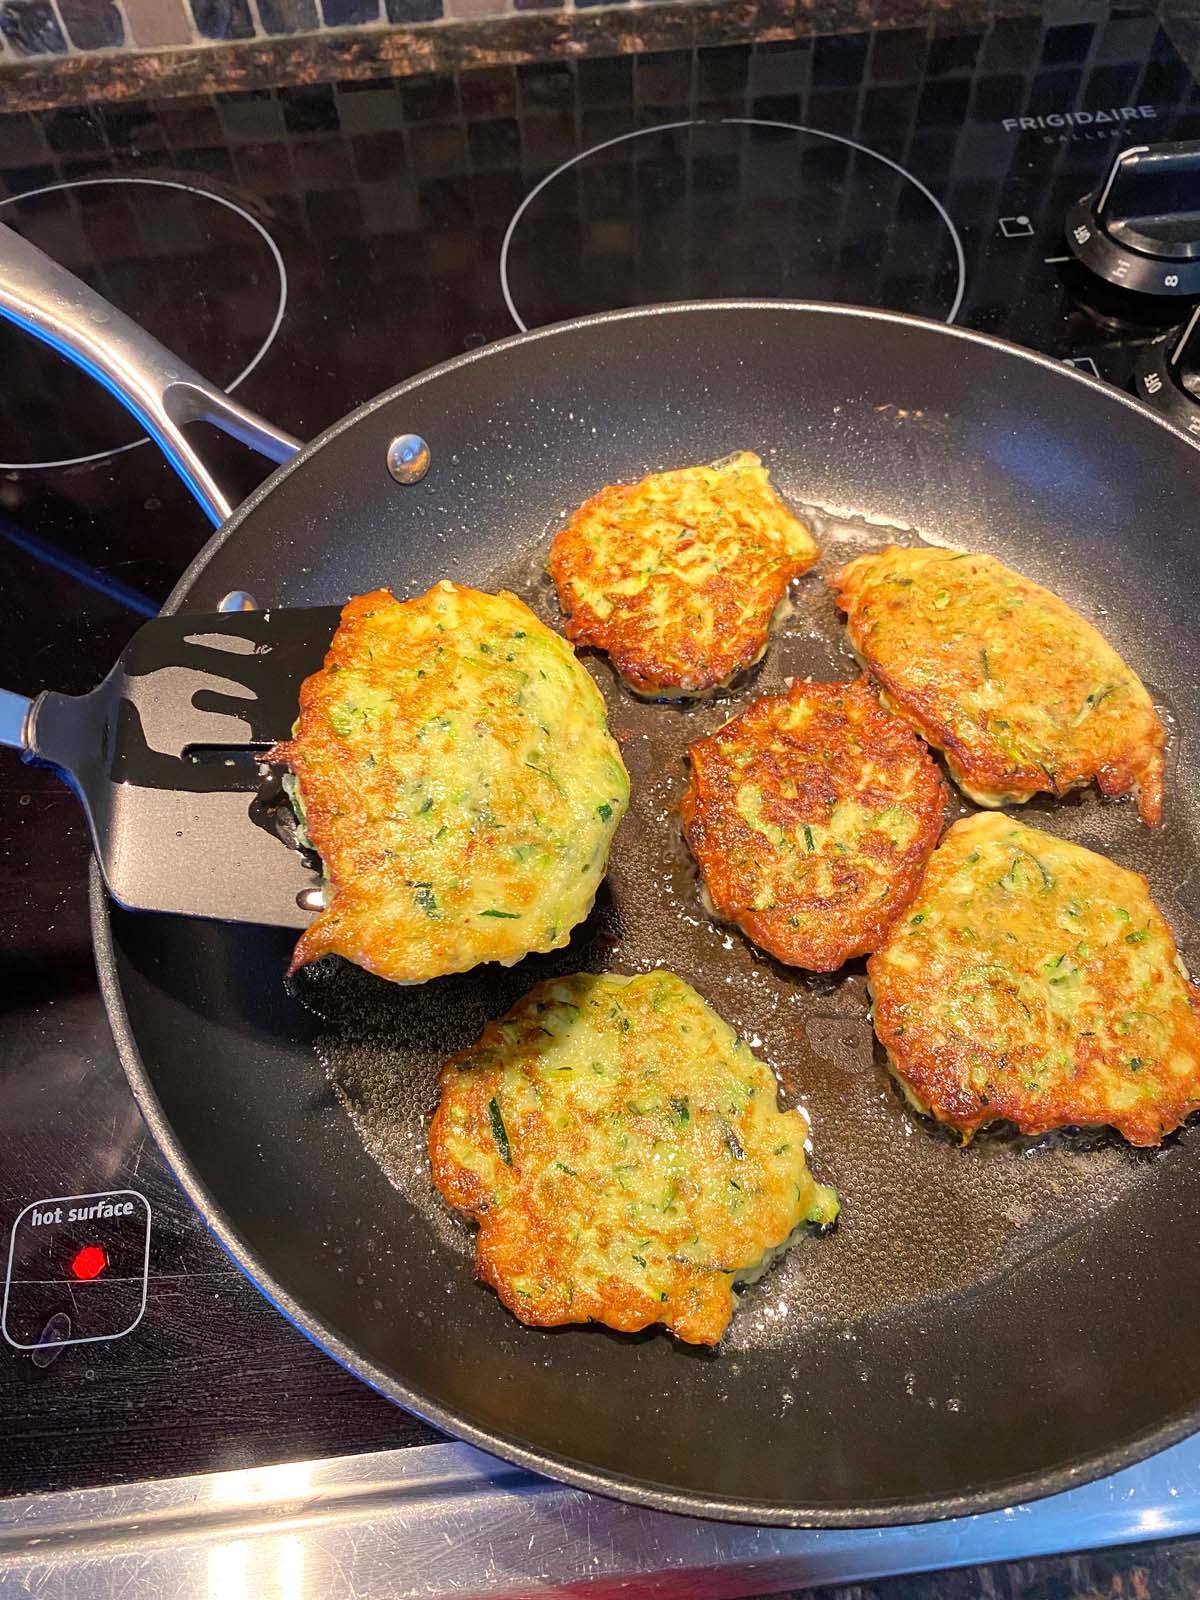 Zucchini pancakes being cooked in a frying pan.